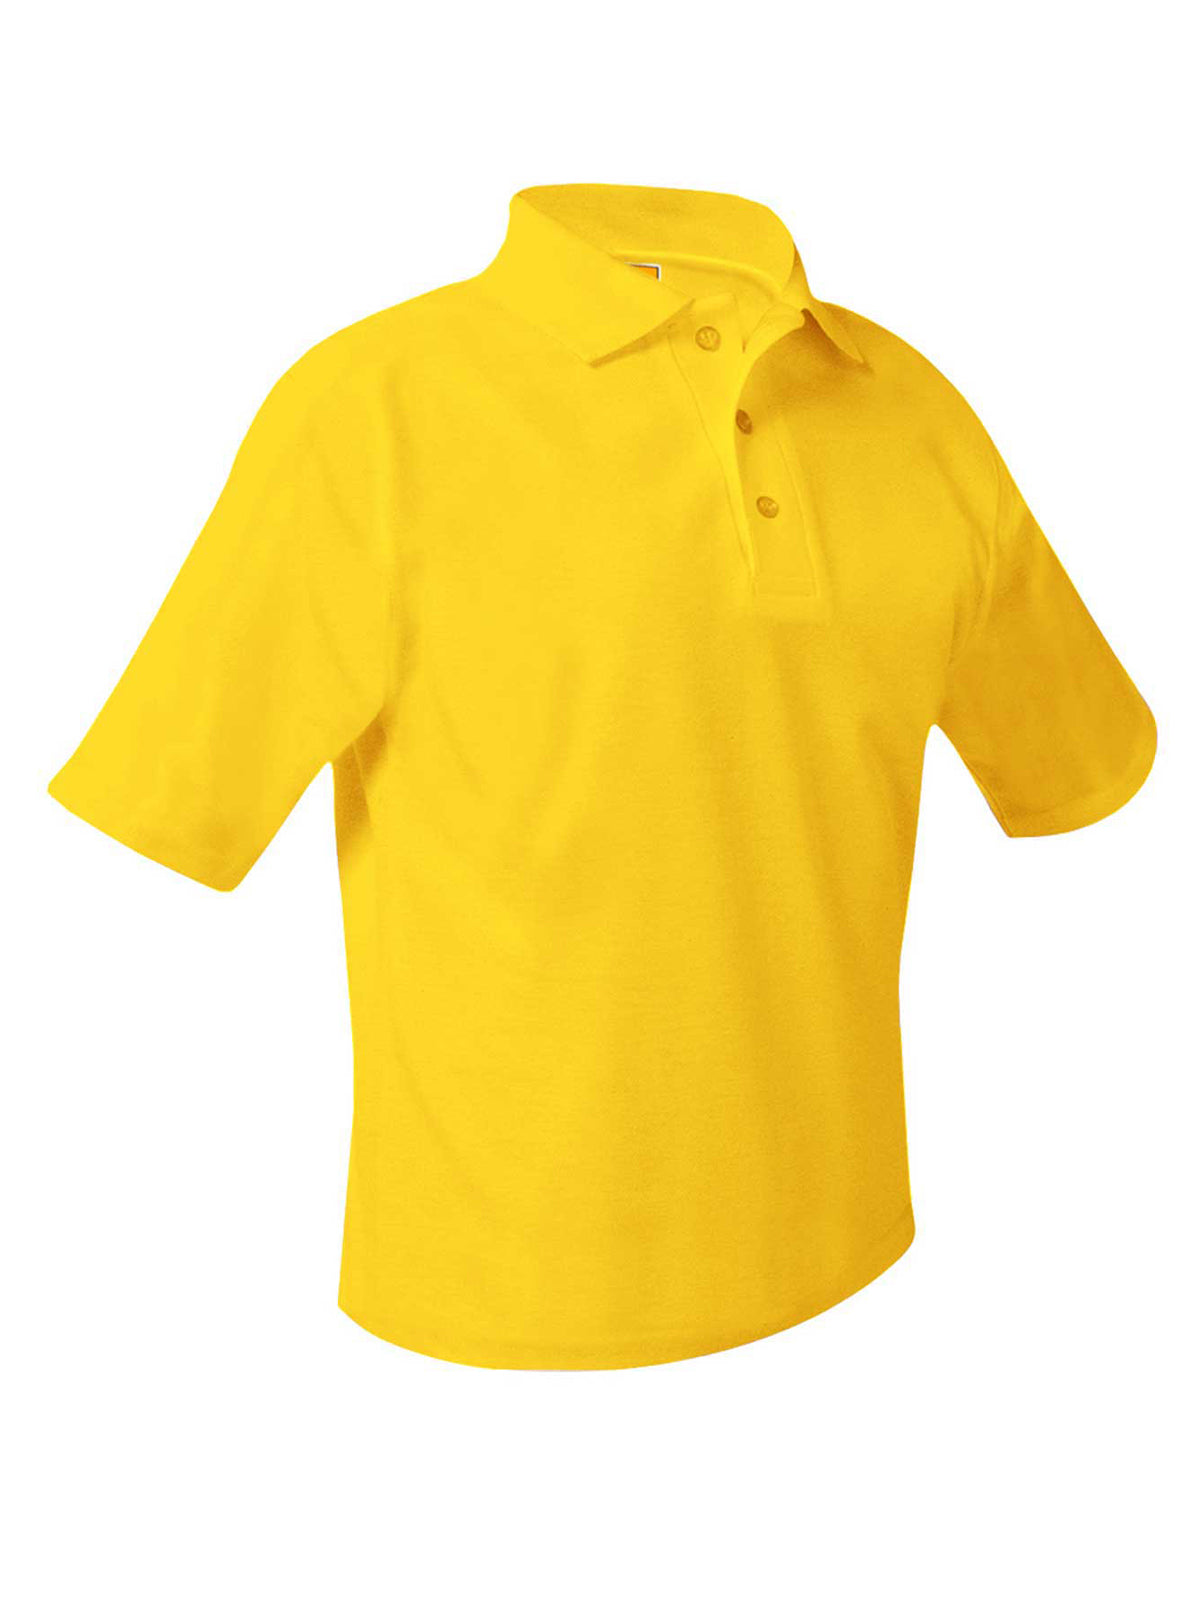 Unisex Adults and Kids Polo - 8760 - ST Maize Yellow